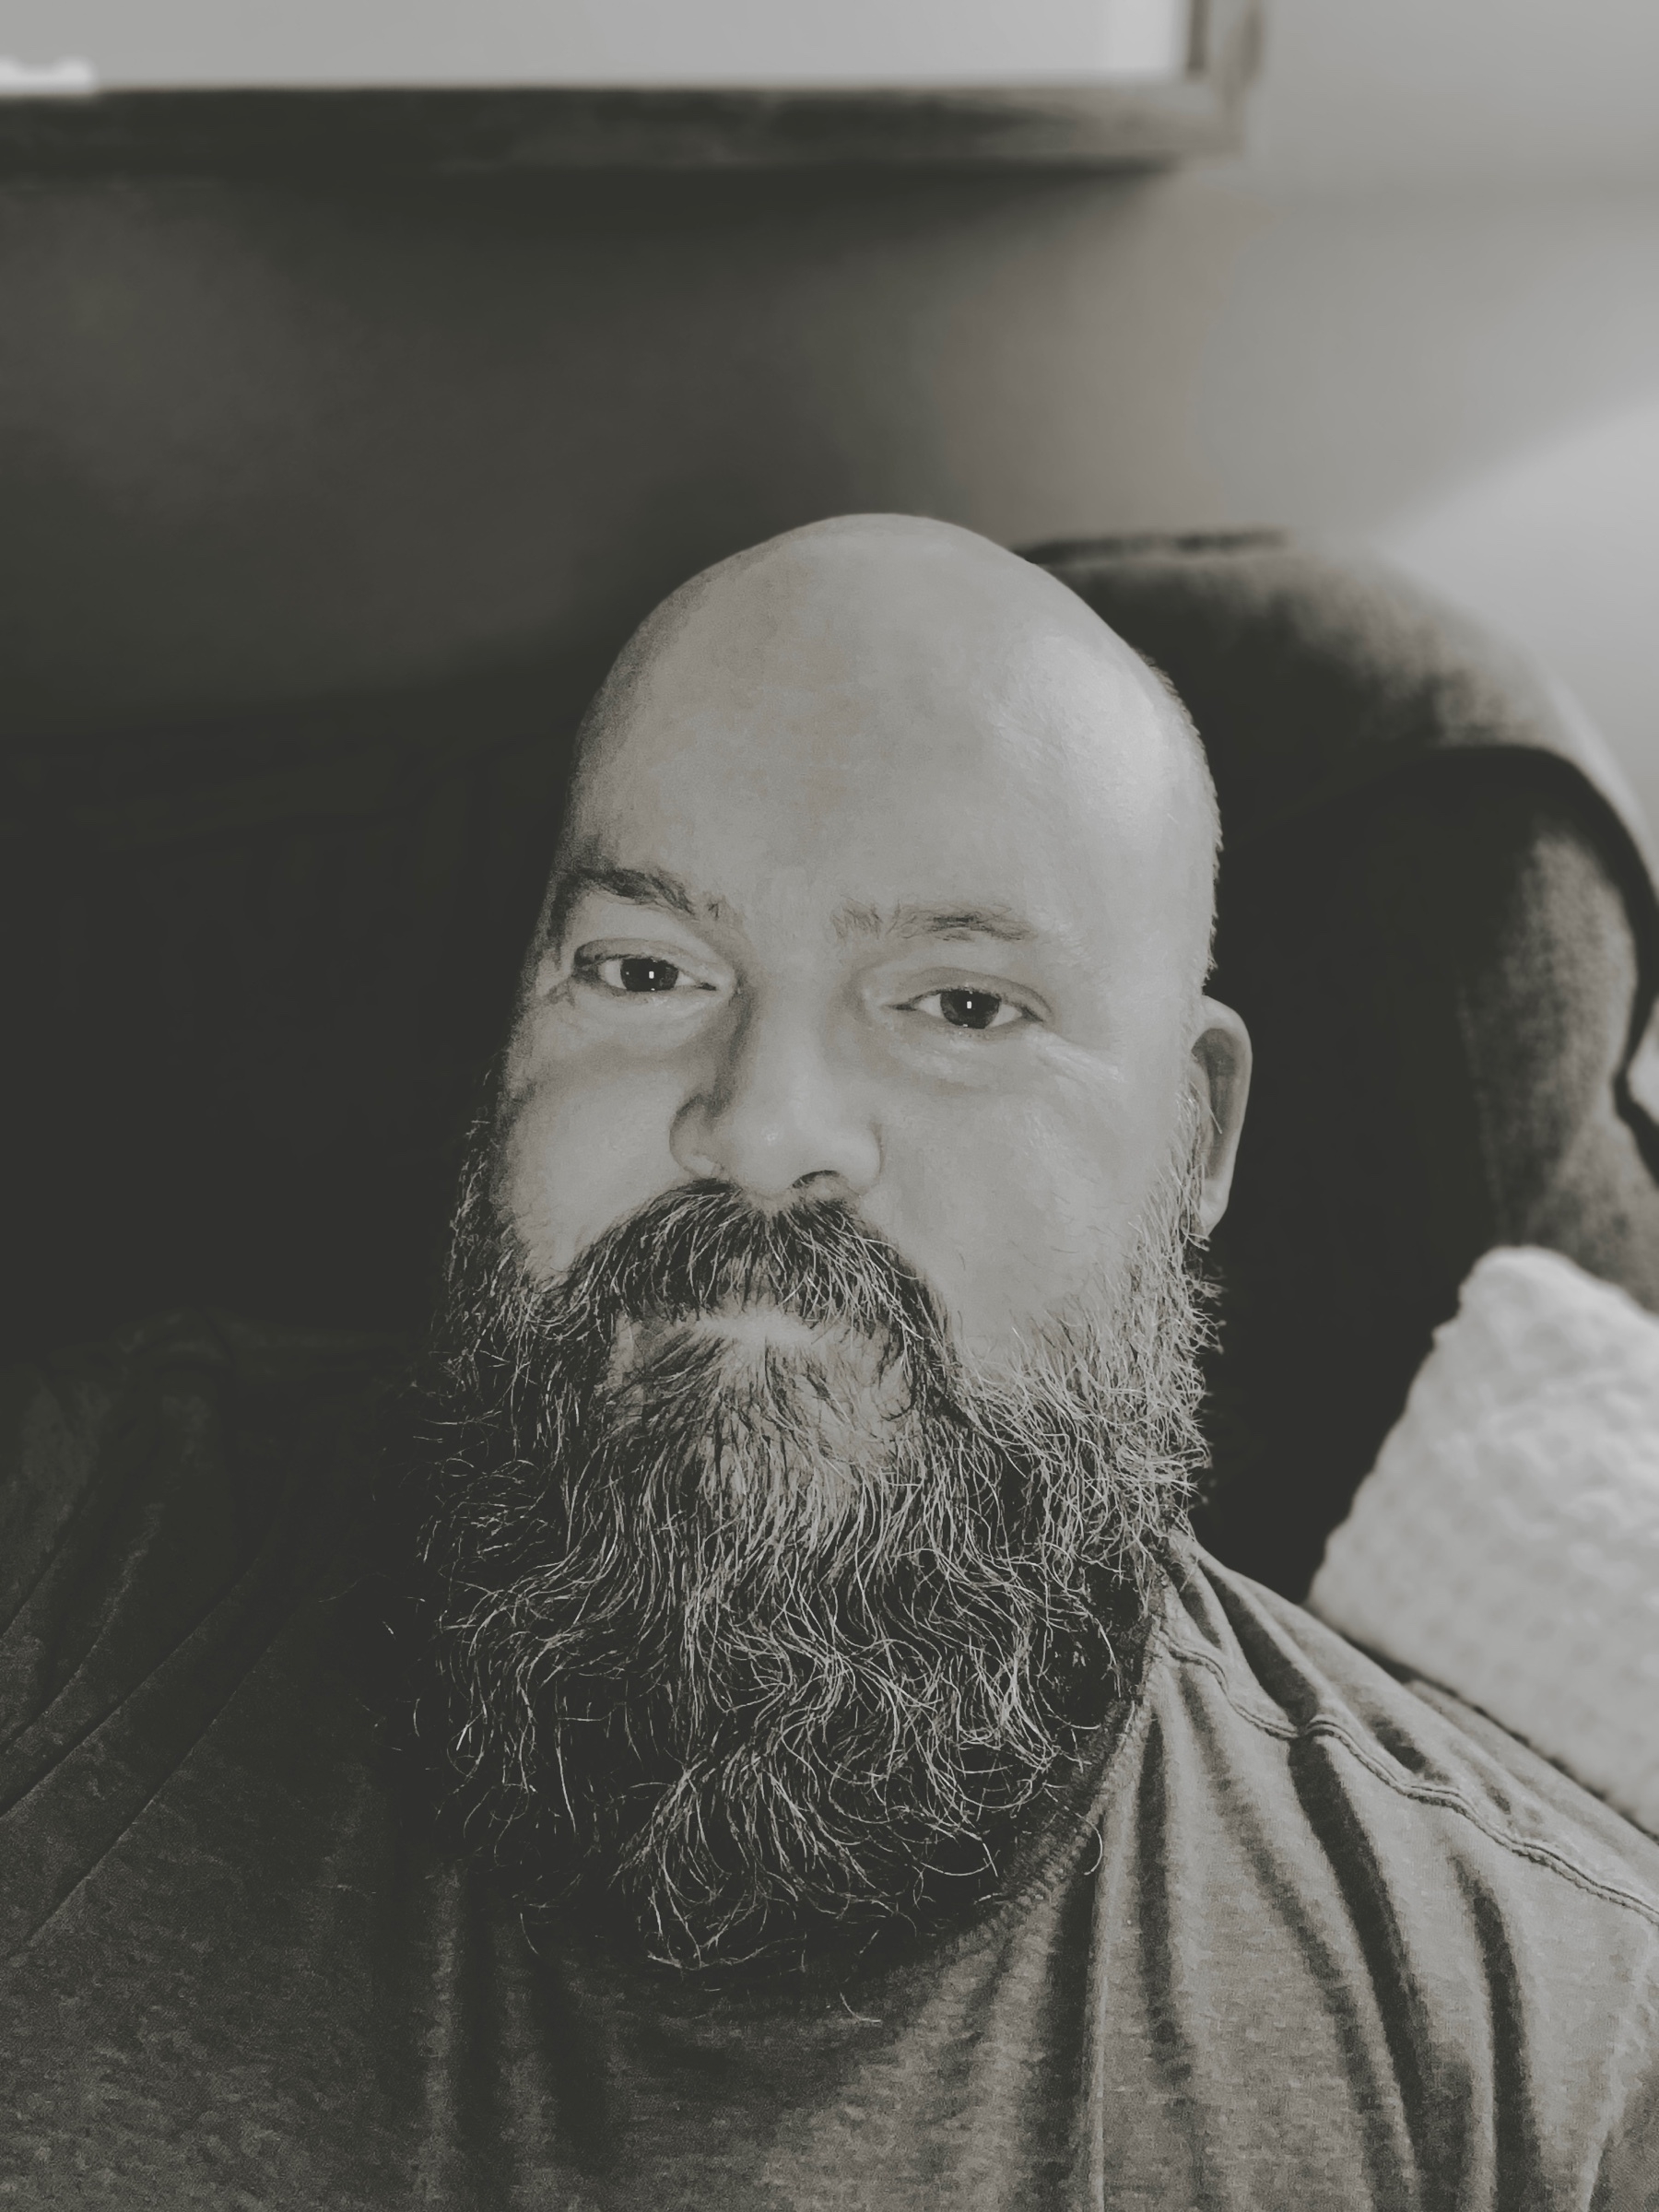 Black and white selfie of me sitting on the couch after showering and fixing up my beard. Too bad it won’t last…